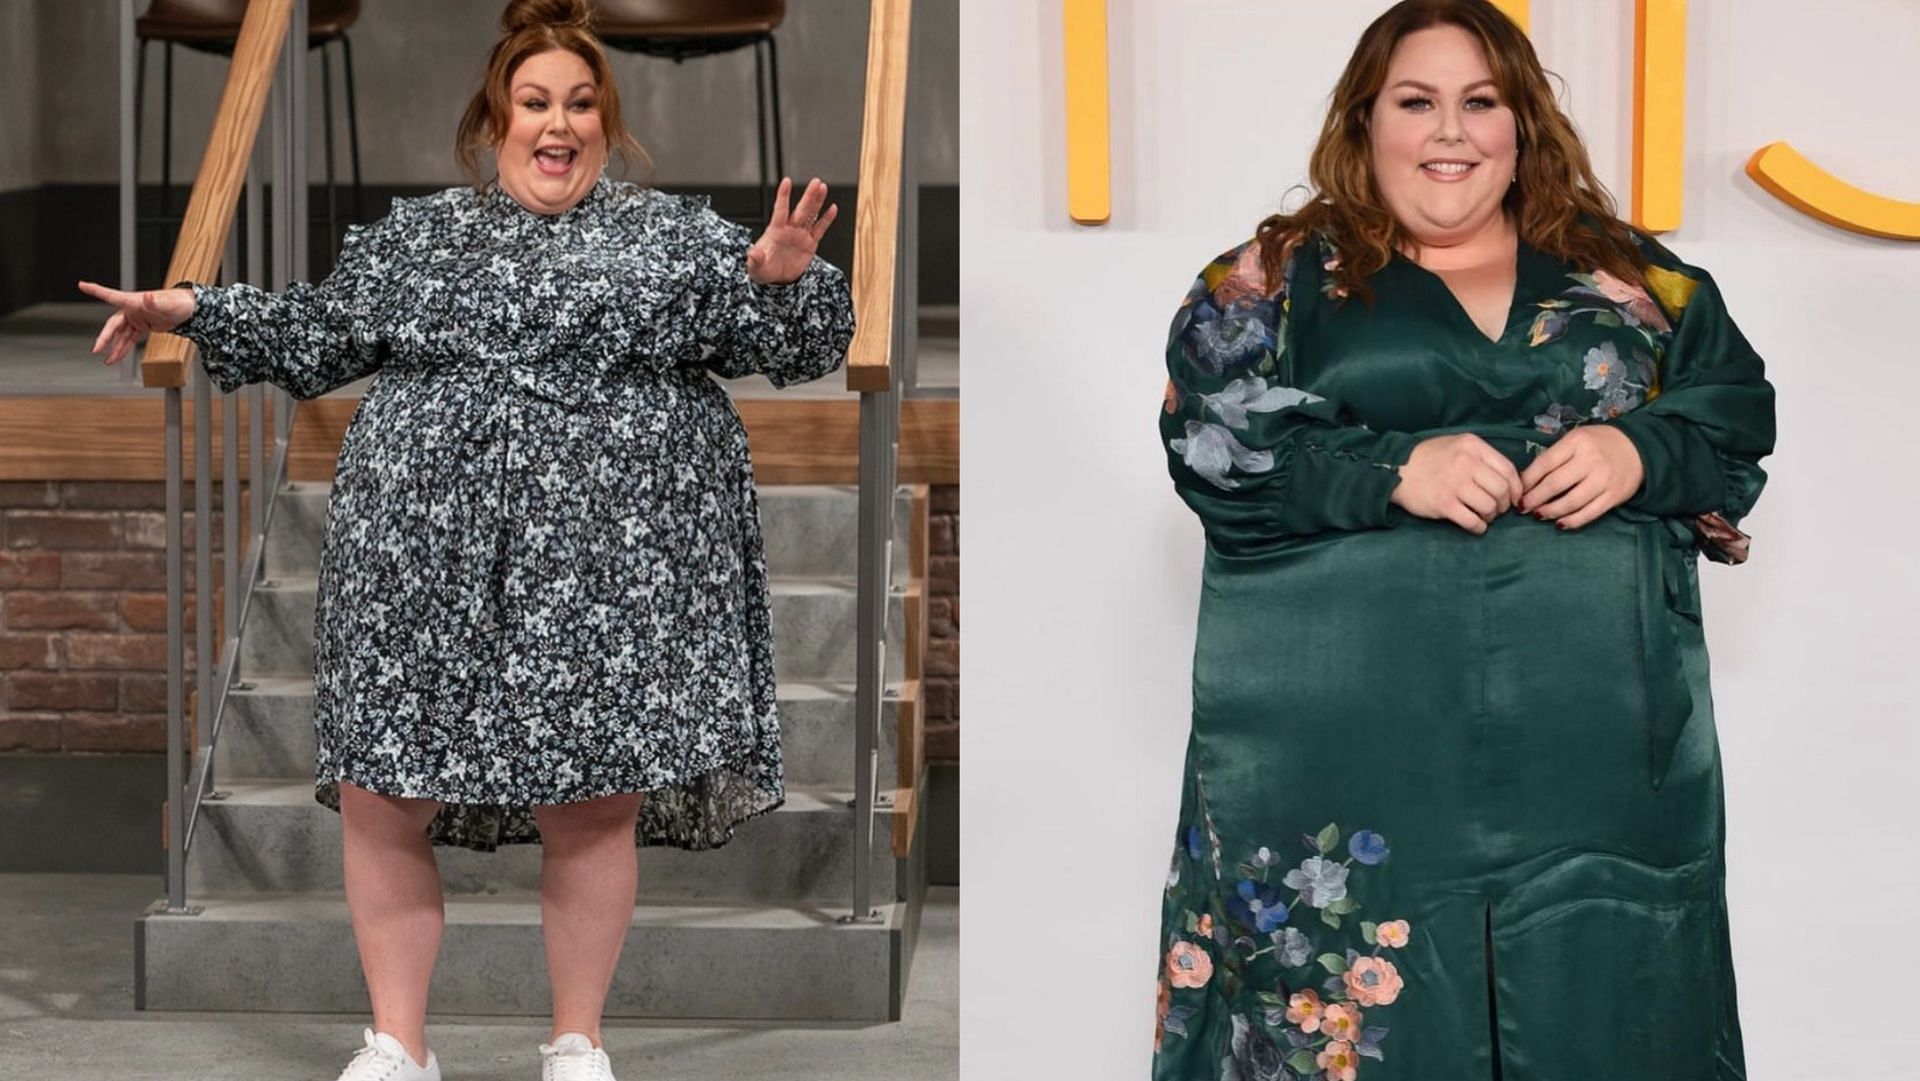 celebrity weight loss: Chrissy Metz's Weight Loss Journey